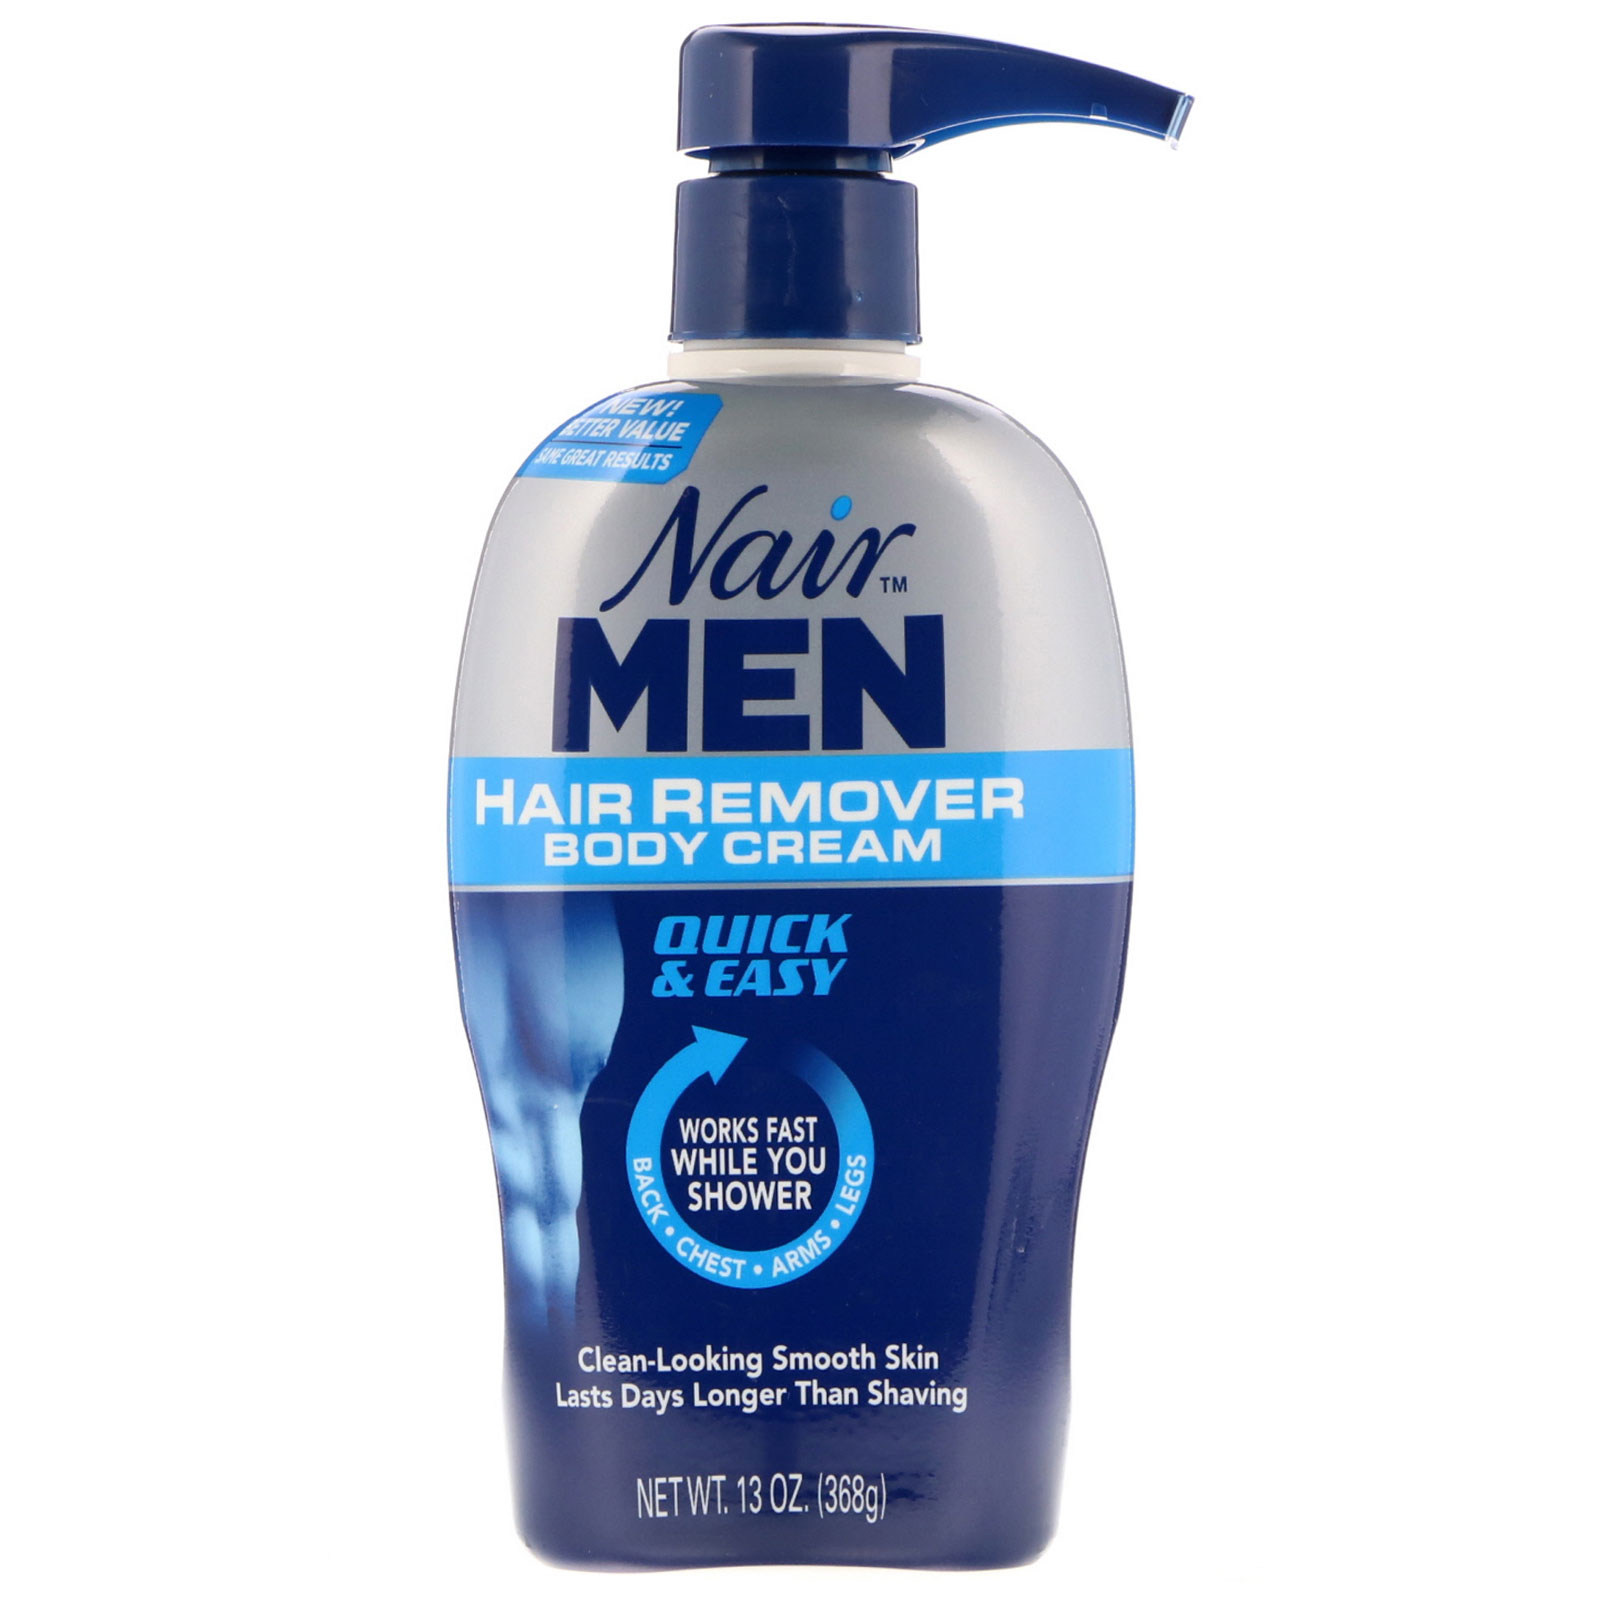 Hair Remover Body Cream by Nair